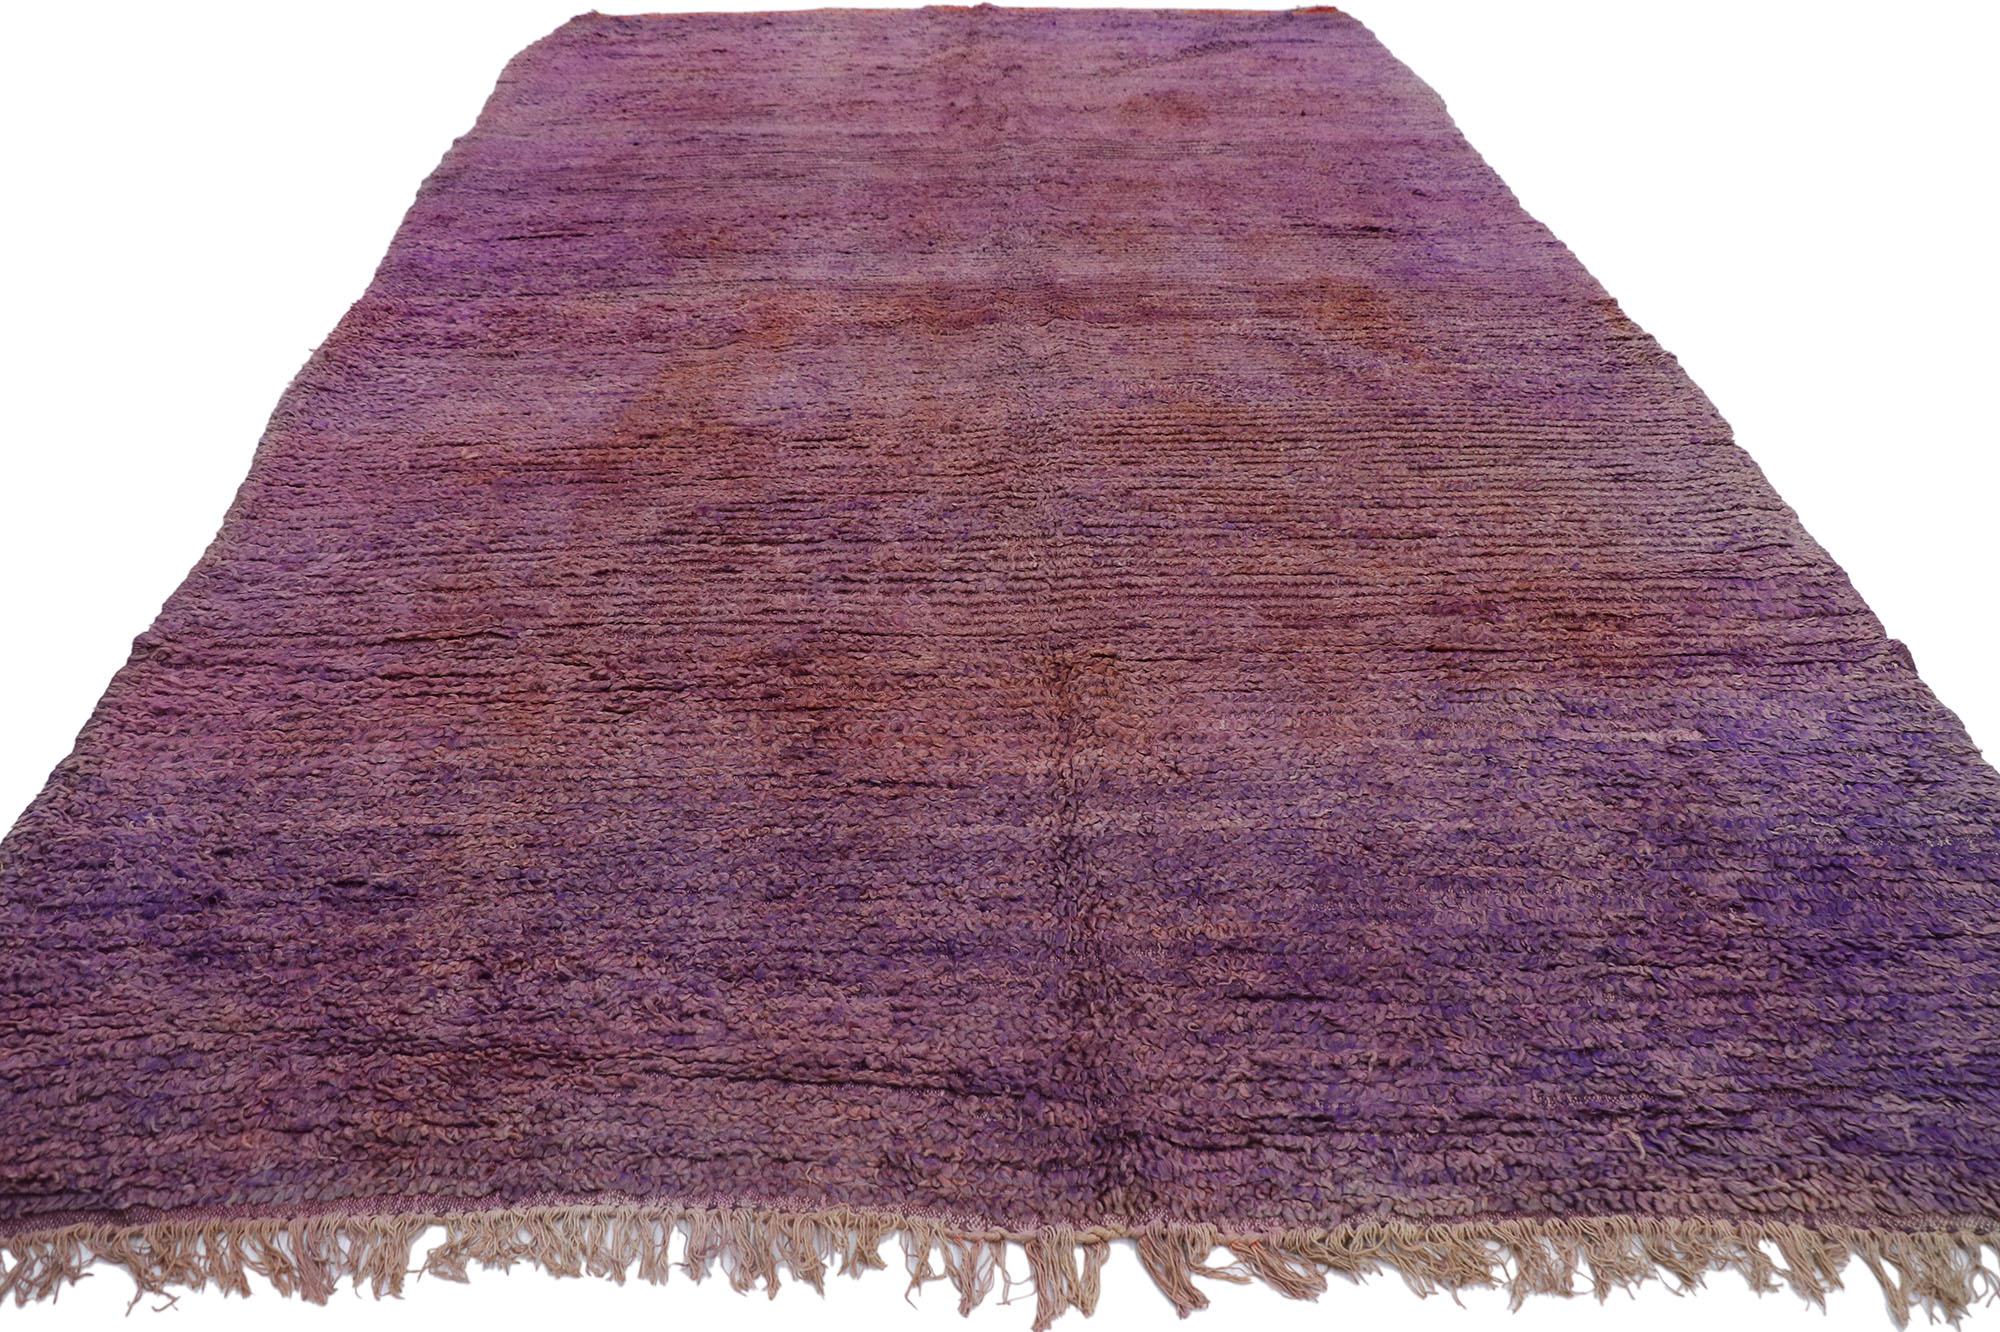 Hand-Knotted Vintage Berber Purple Beni Mrirt Moroccan Rug with Bohemian Style